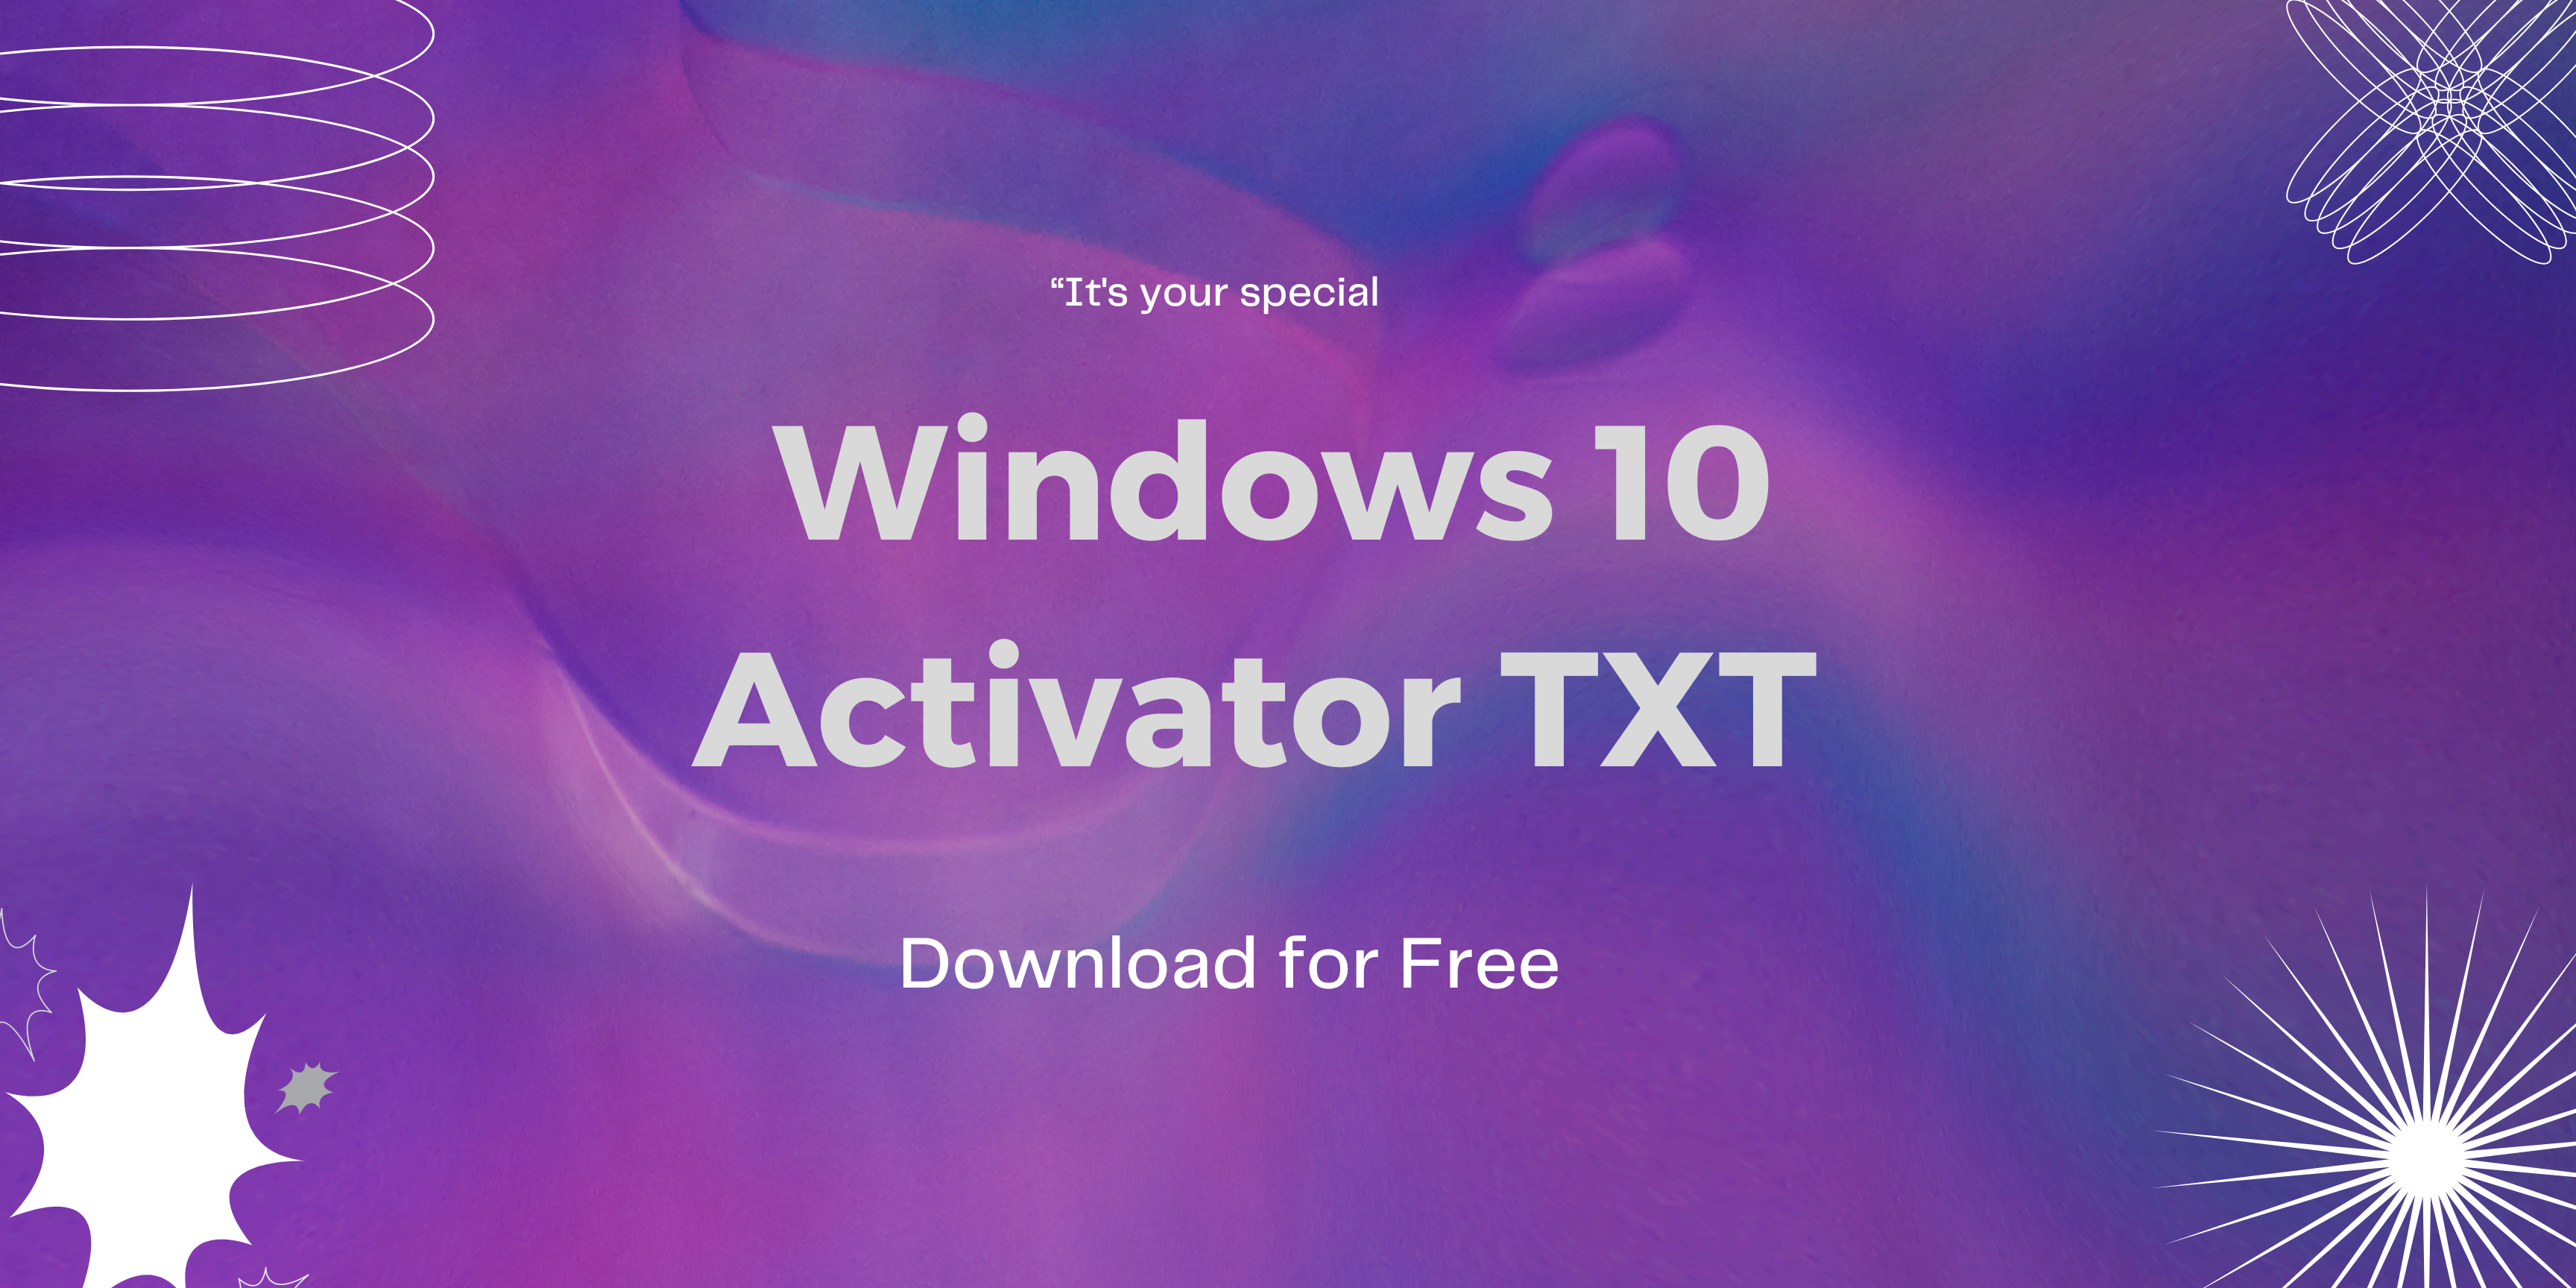 Windows 10 Activator TXT Download for Free